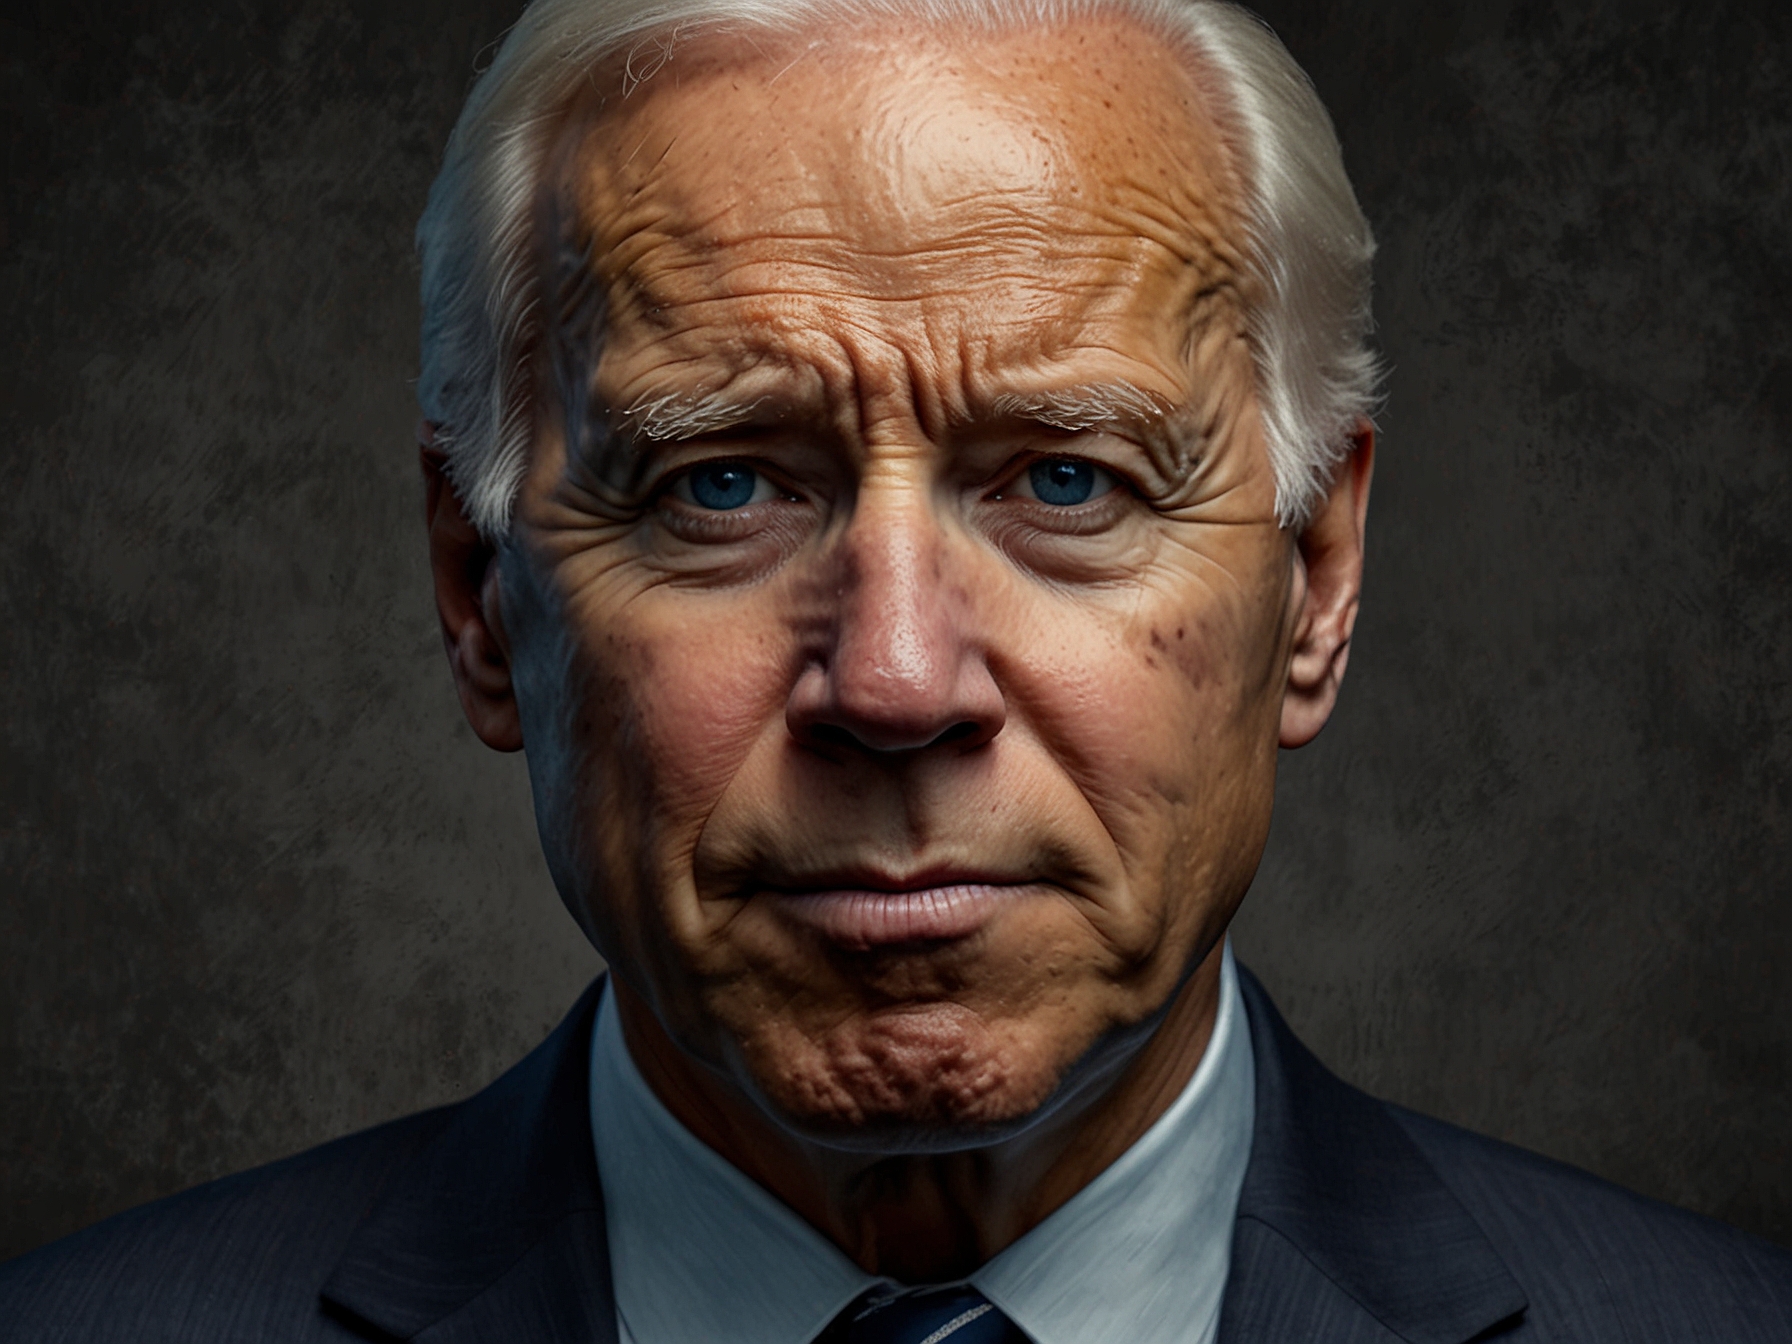 An image showing President Joe Biden during a public appearance, appearing confused or forgetful, reflecting concerns about his cognitive abilities and raising questions about his mental state.